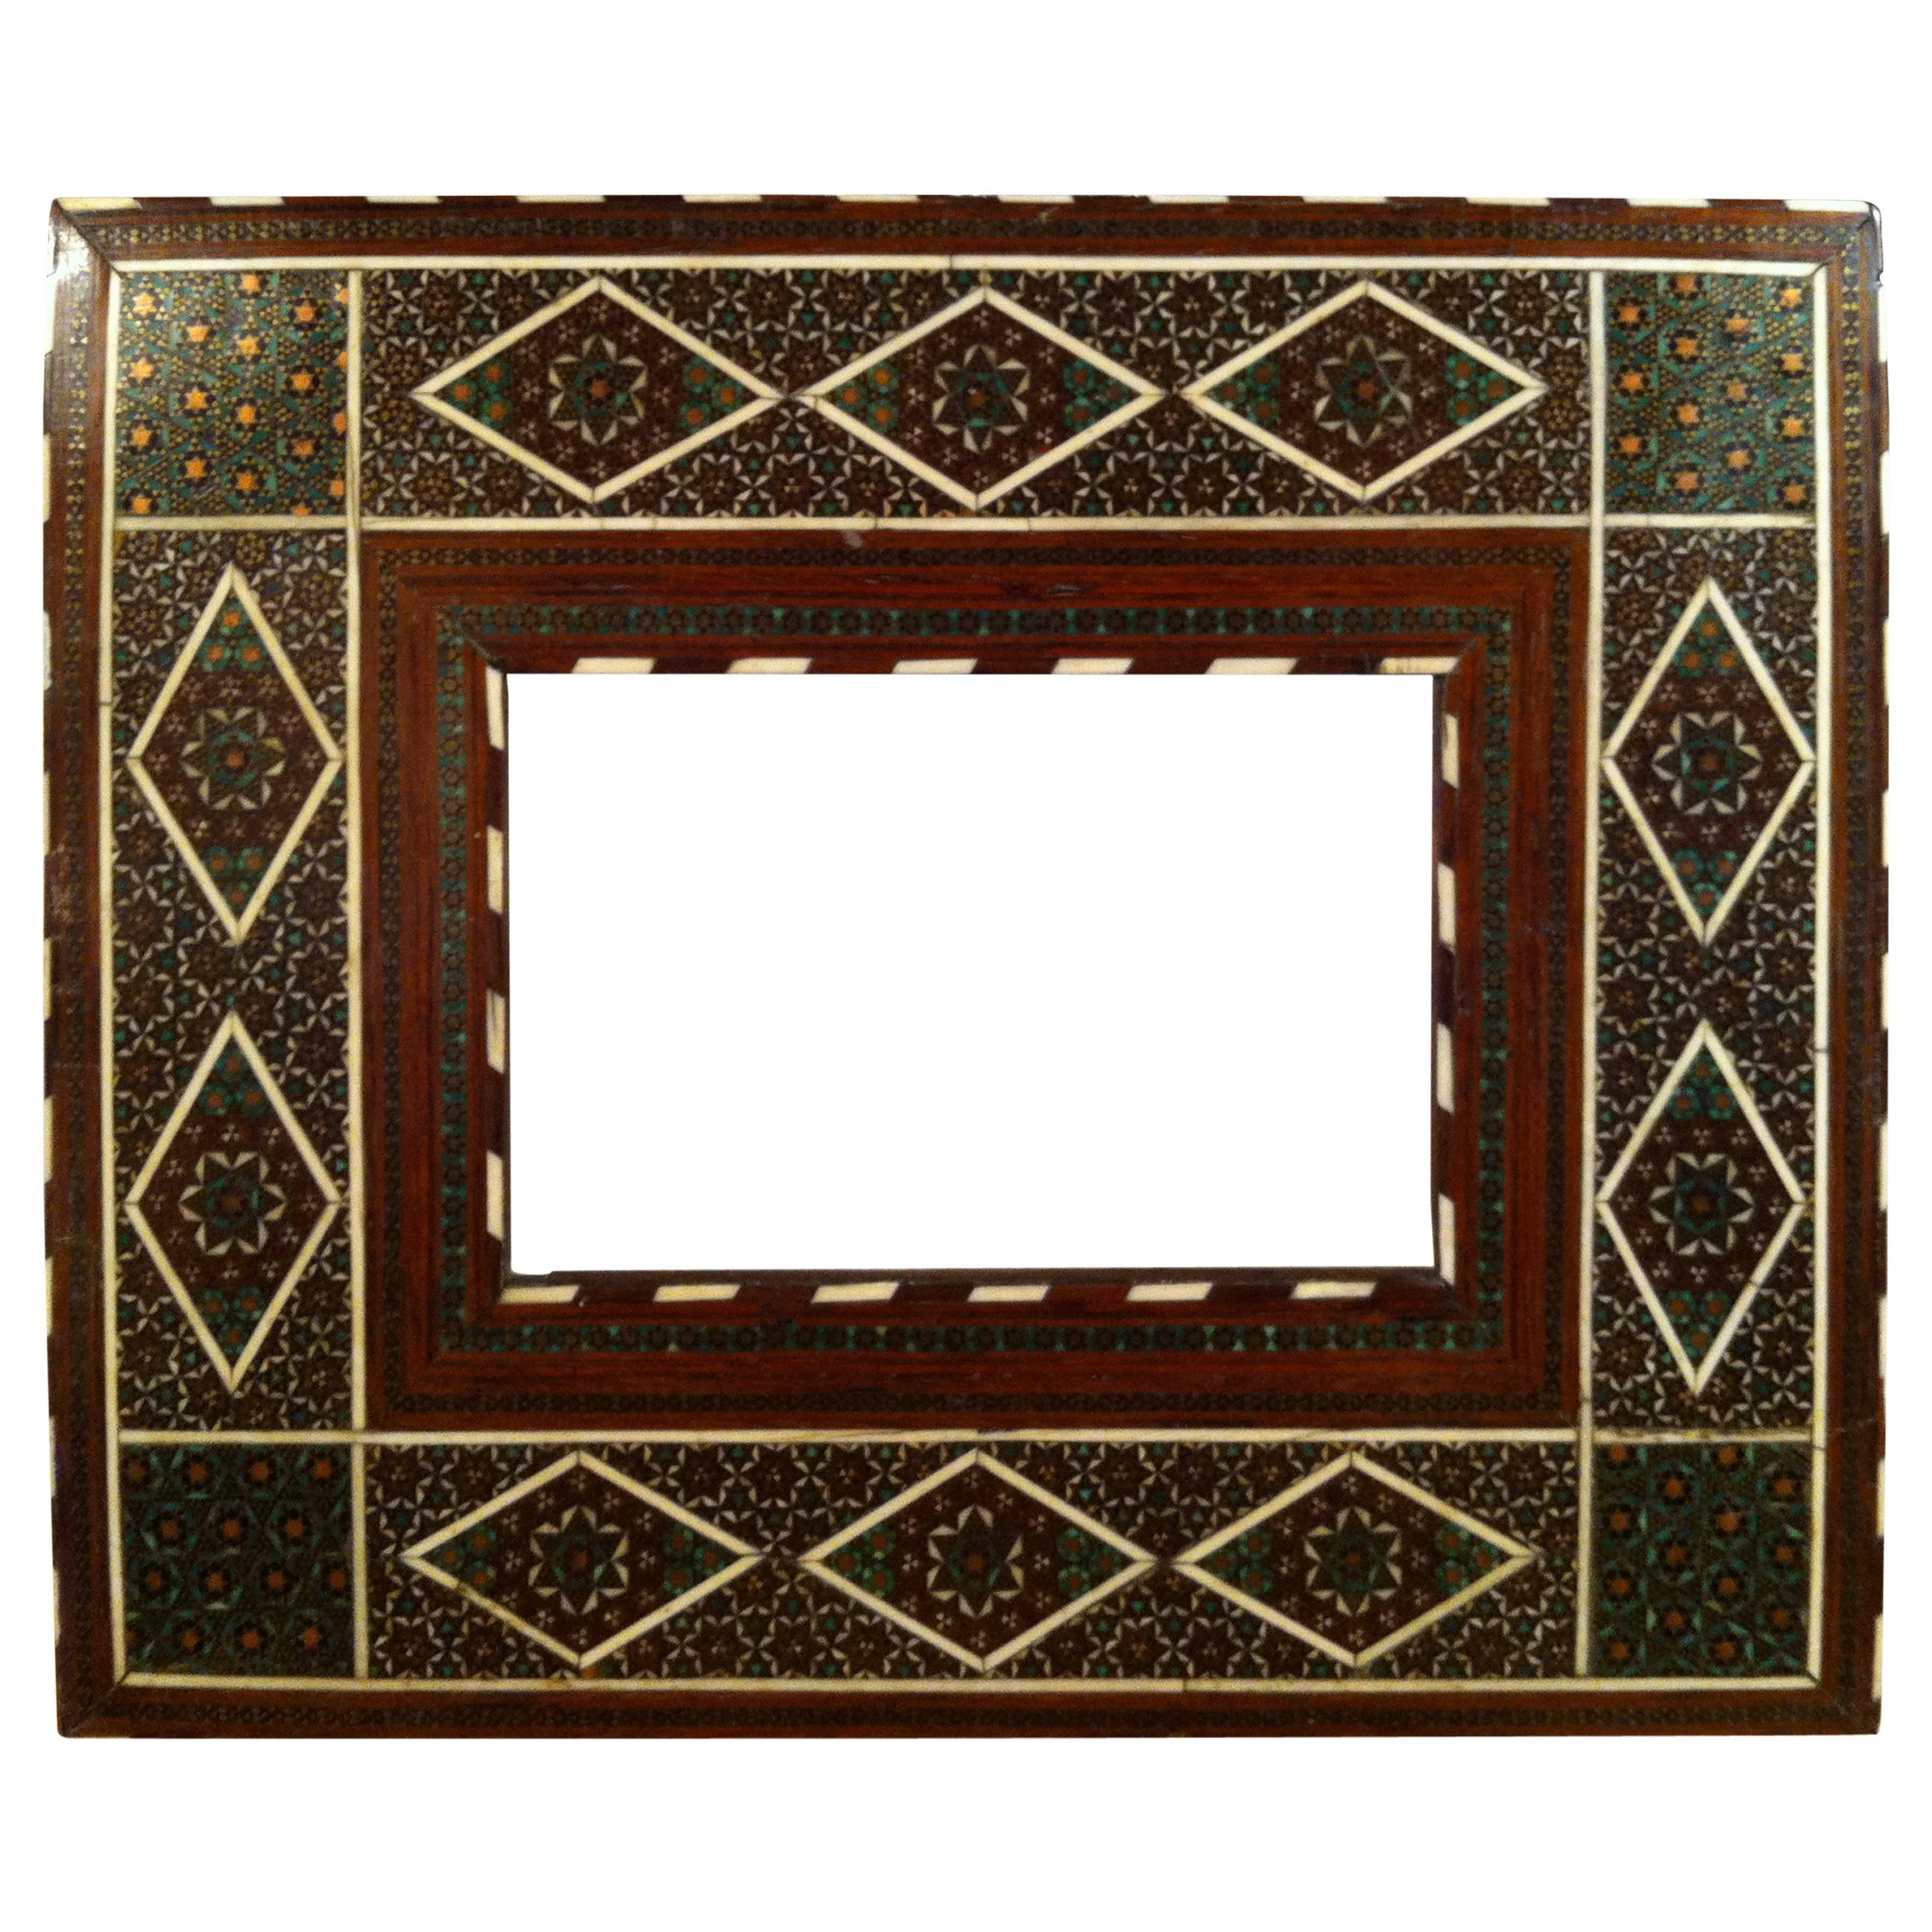 Anglo-Indian Inlaid Frame